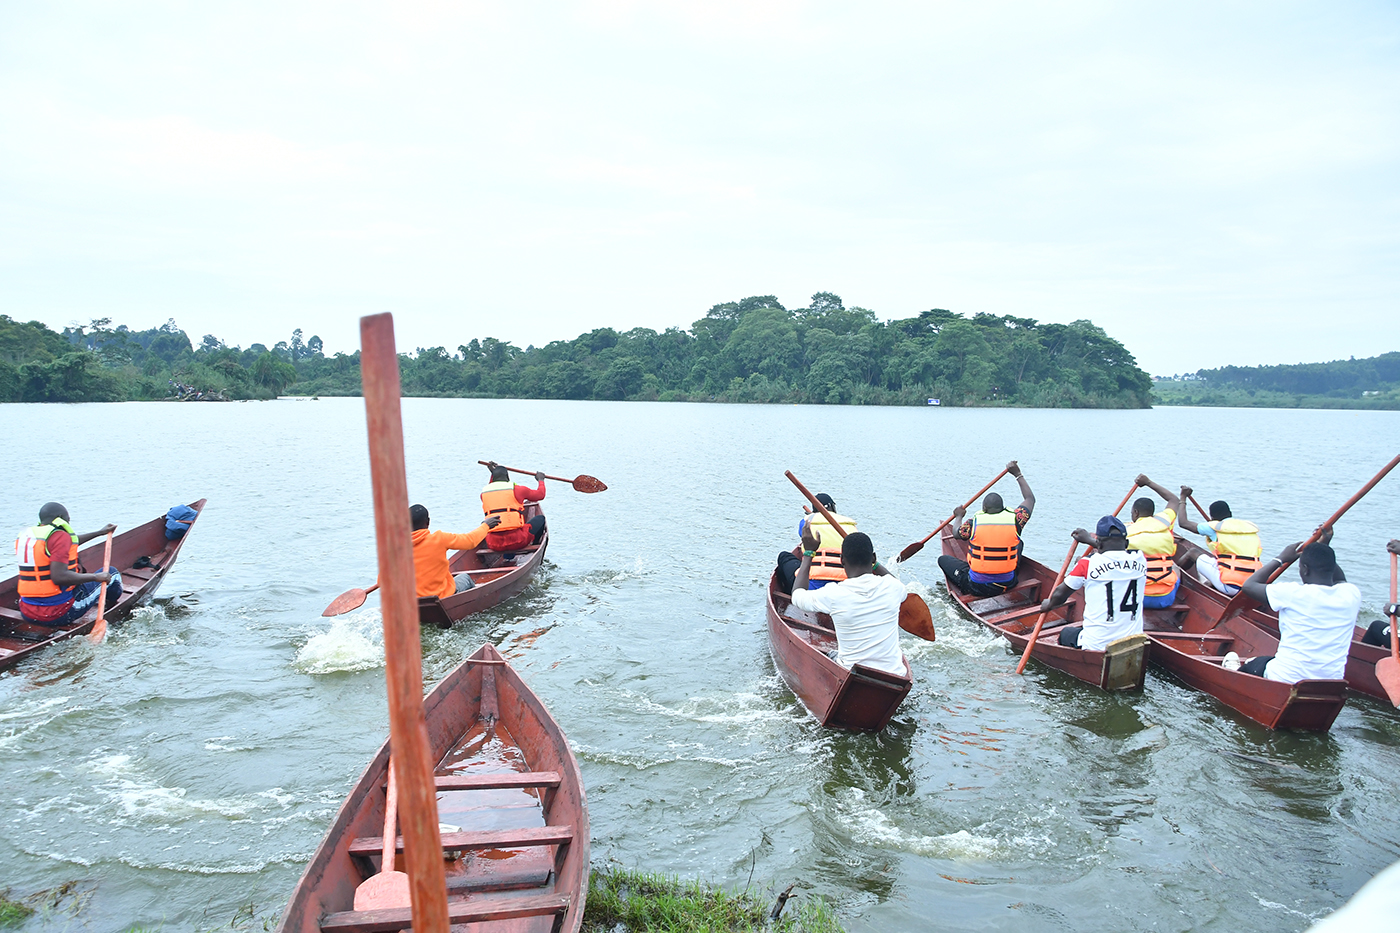 Boat regata at Lake Saaka was part of the sports engagements that excited attendants. Photo by EDGAR R. BATTE.